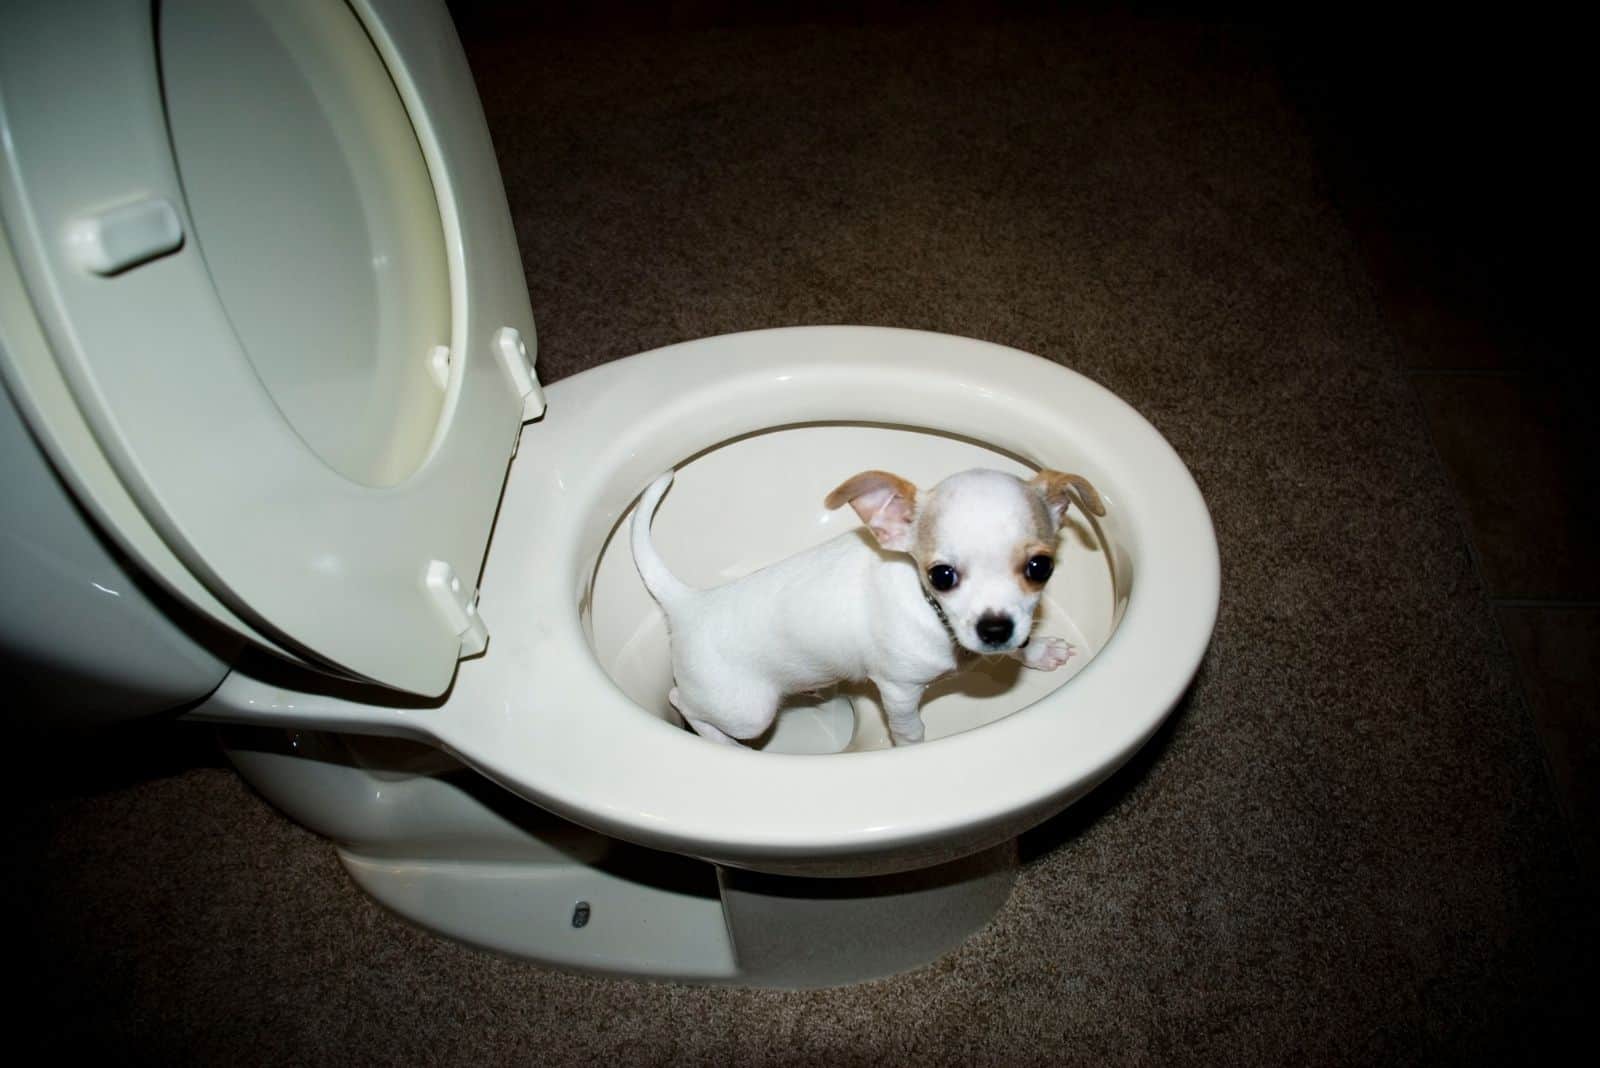 a chihuahua inside a new white toilet bowl